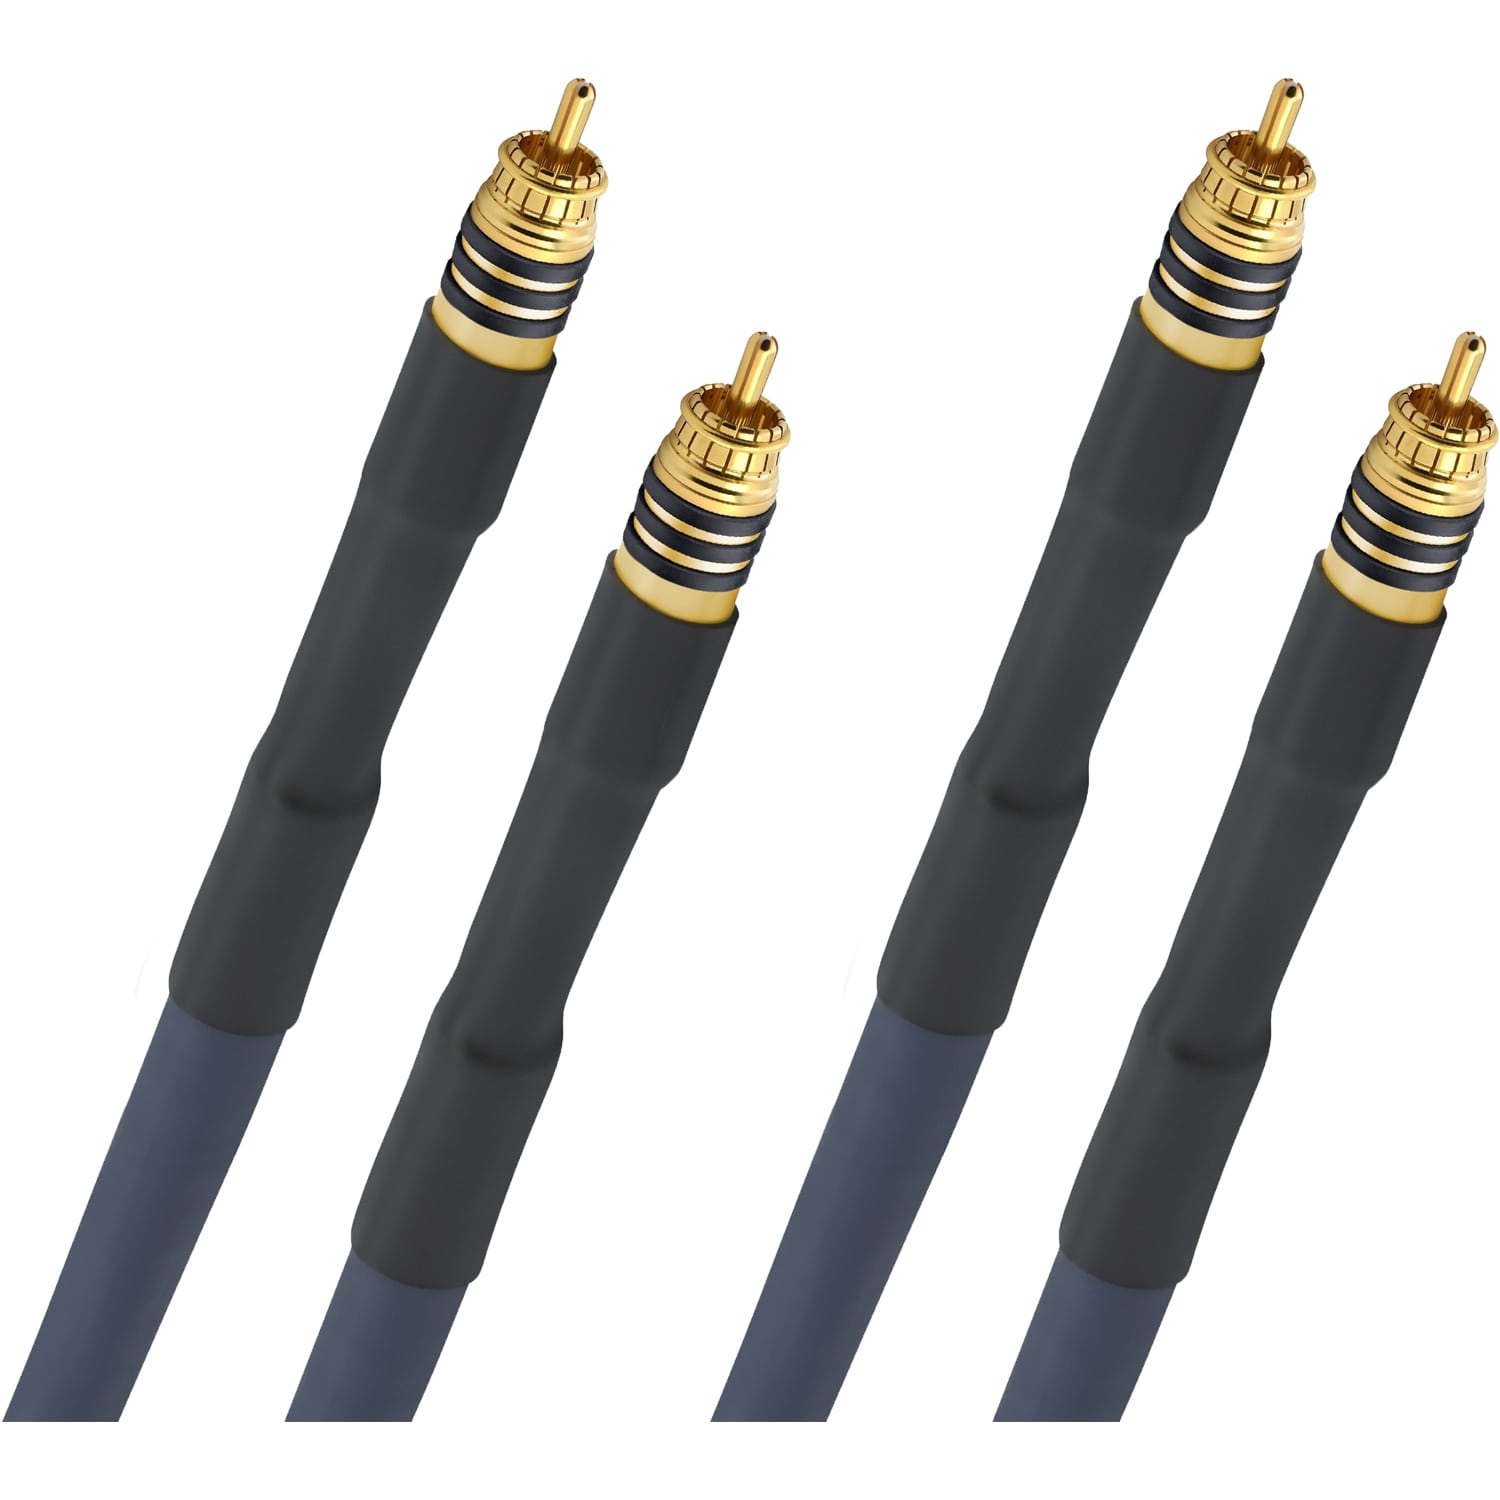 Кабели межблочные аудио Oehlbach STATE OF THE ART XXL Cable RCA, 2x1,25m, gold, D1C13113 кабели межблочные аудио oehlbach state of the art xxl cable rca 2x2 00m gold d1c13116